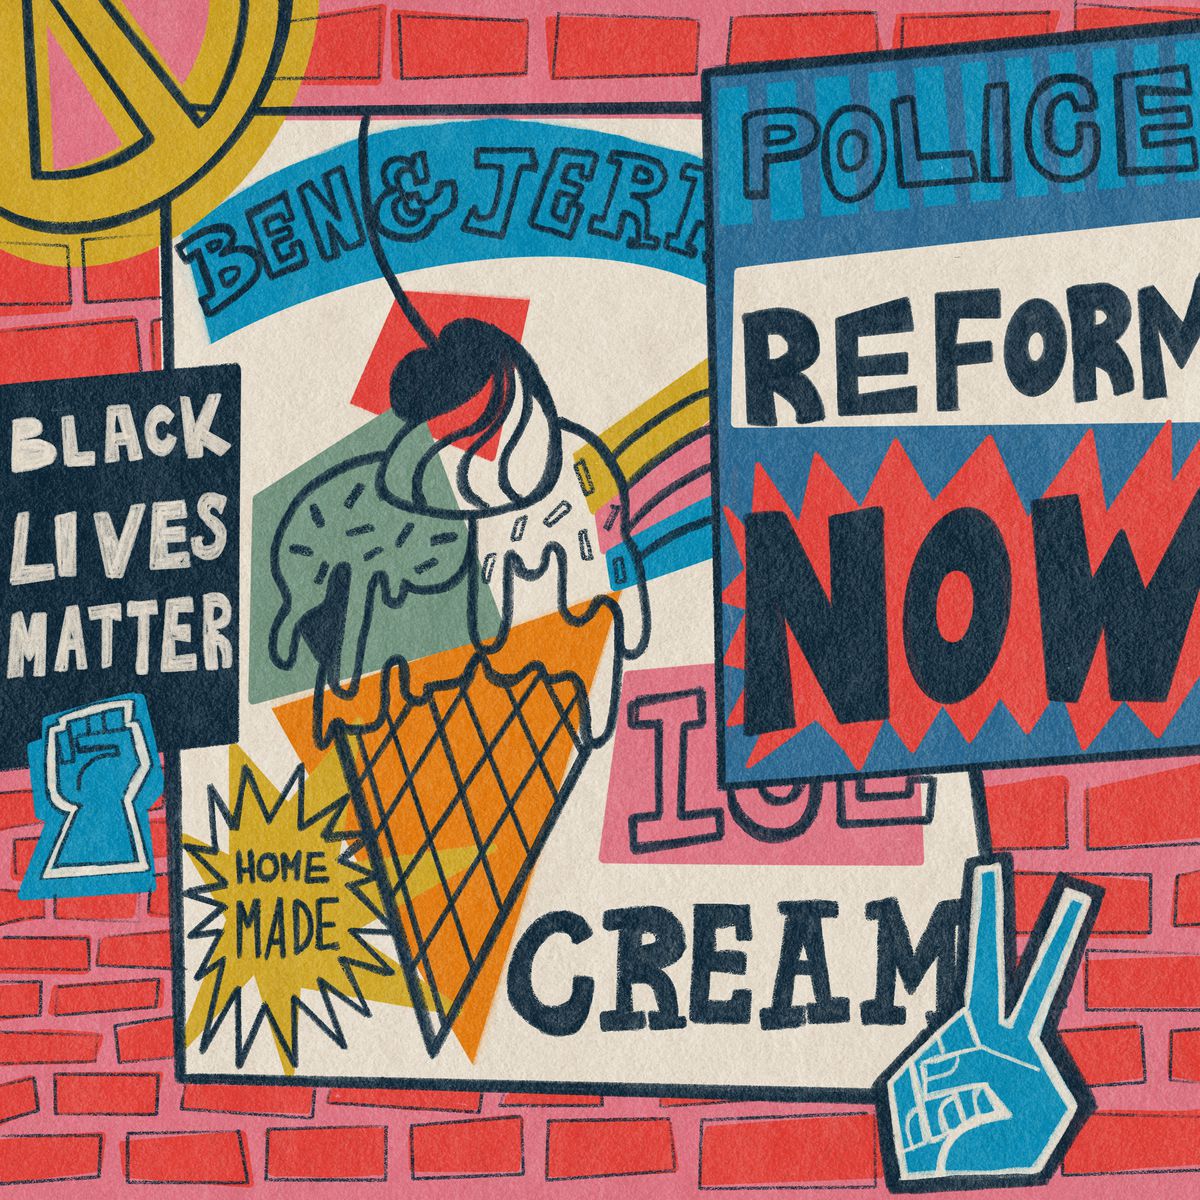 A colorful image that features a brick wall with (from left to right), a Black Lives Matter poster, a Ben &amp; Jerry’s ice cream poster, and a Police Reform Now poster. 